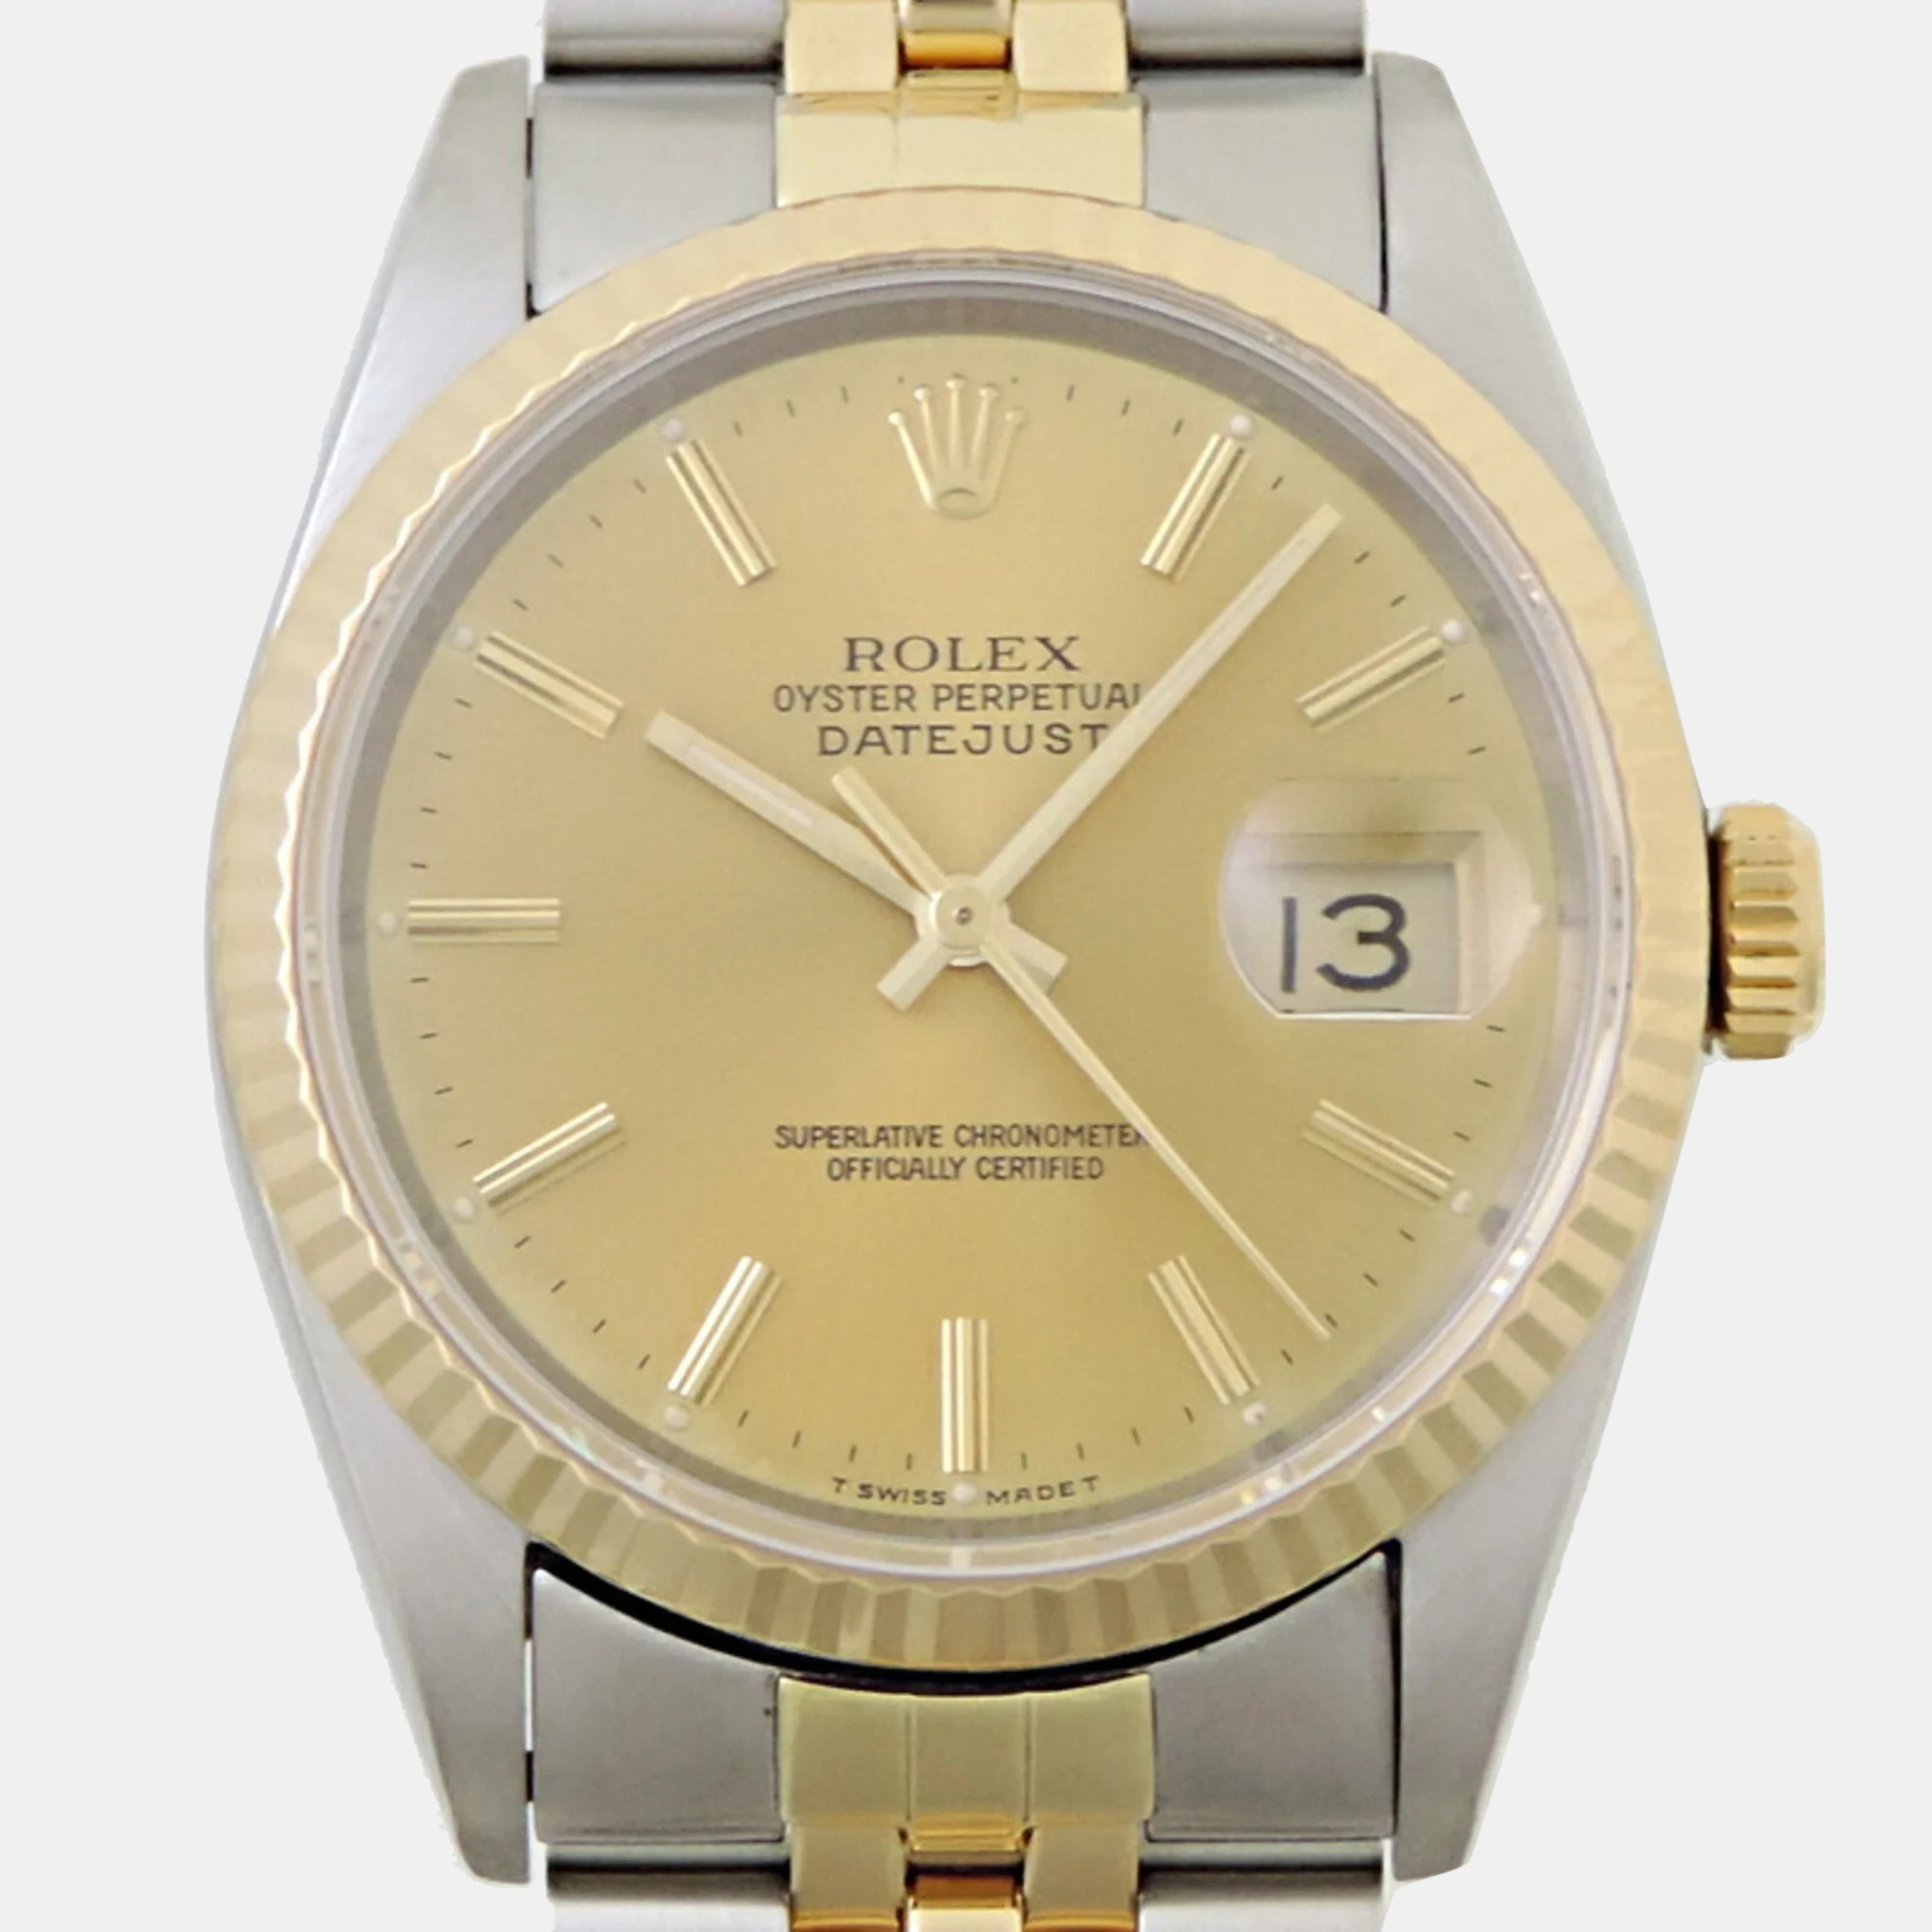 Rolex Champagne 18k Yellow Gold Stainless Steel Datejust 16233 Automatic Men's Wristwatch 36 Mm